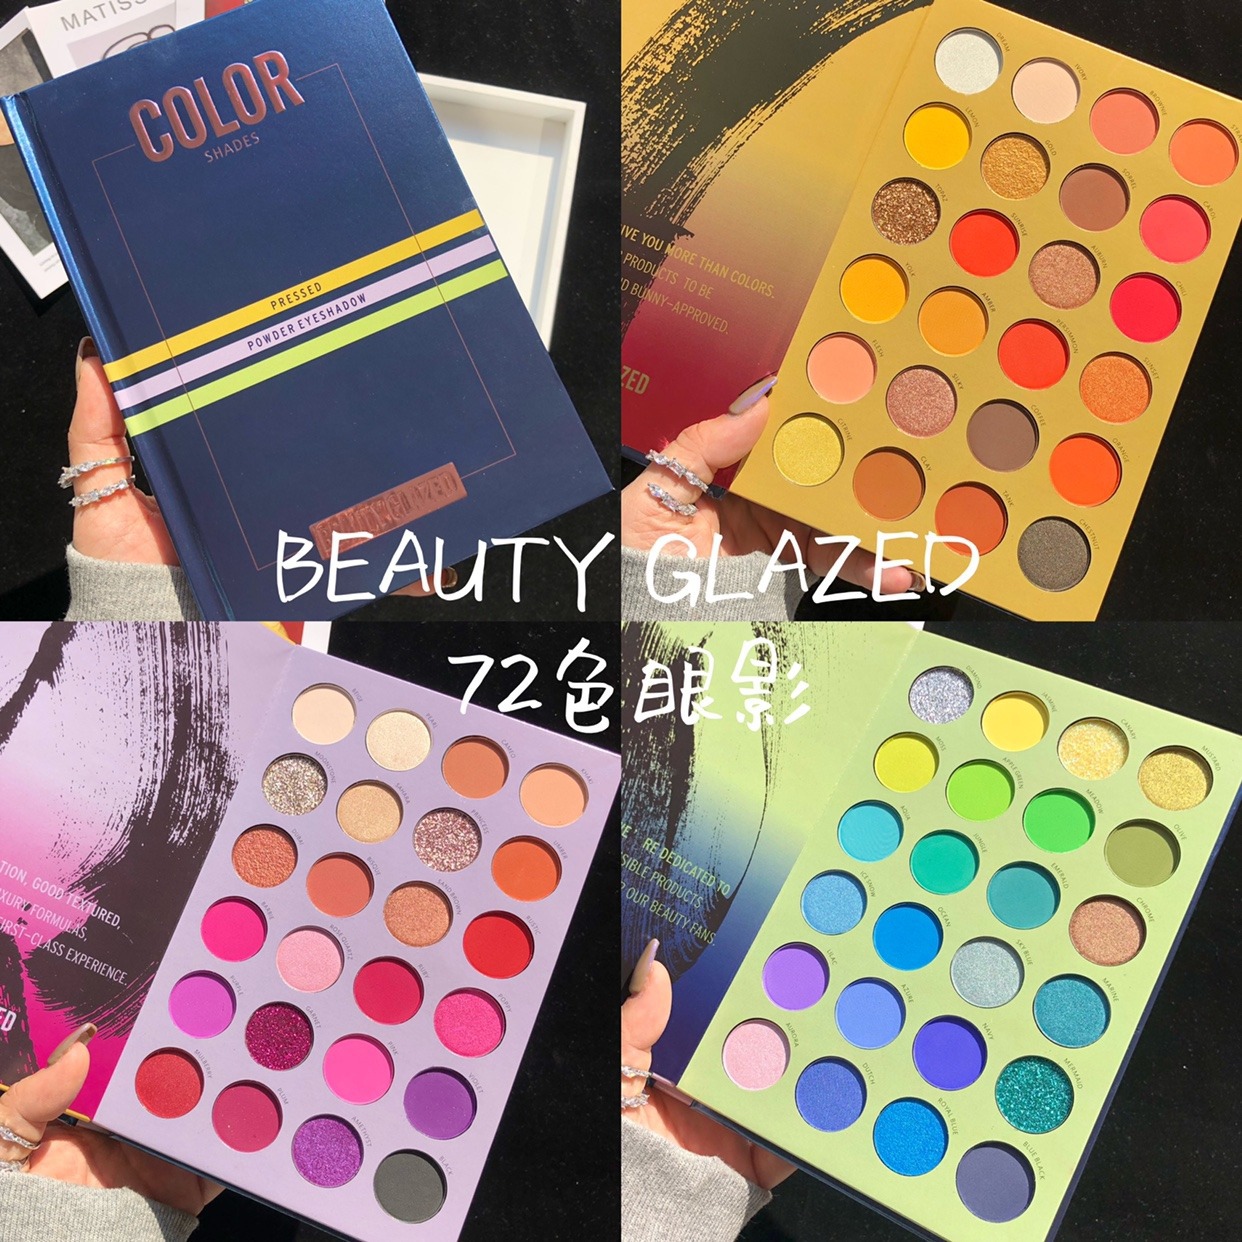 Authentic Beauty Glazed39 Color Rainbow Eye Shadow Children's Stage Makeup Color Eye Shadow Plate Shimmer Matte Ins